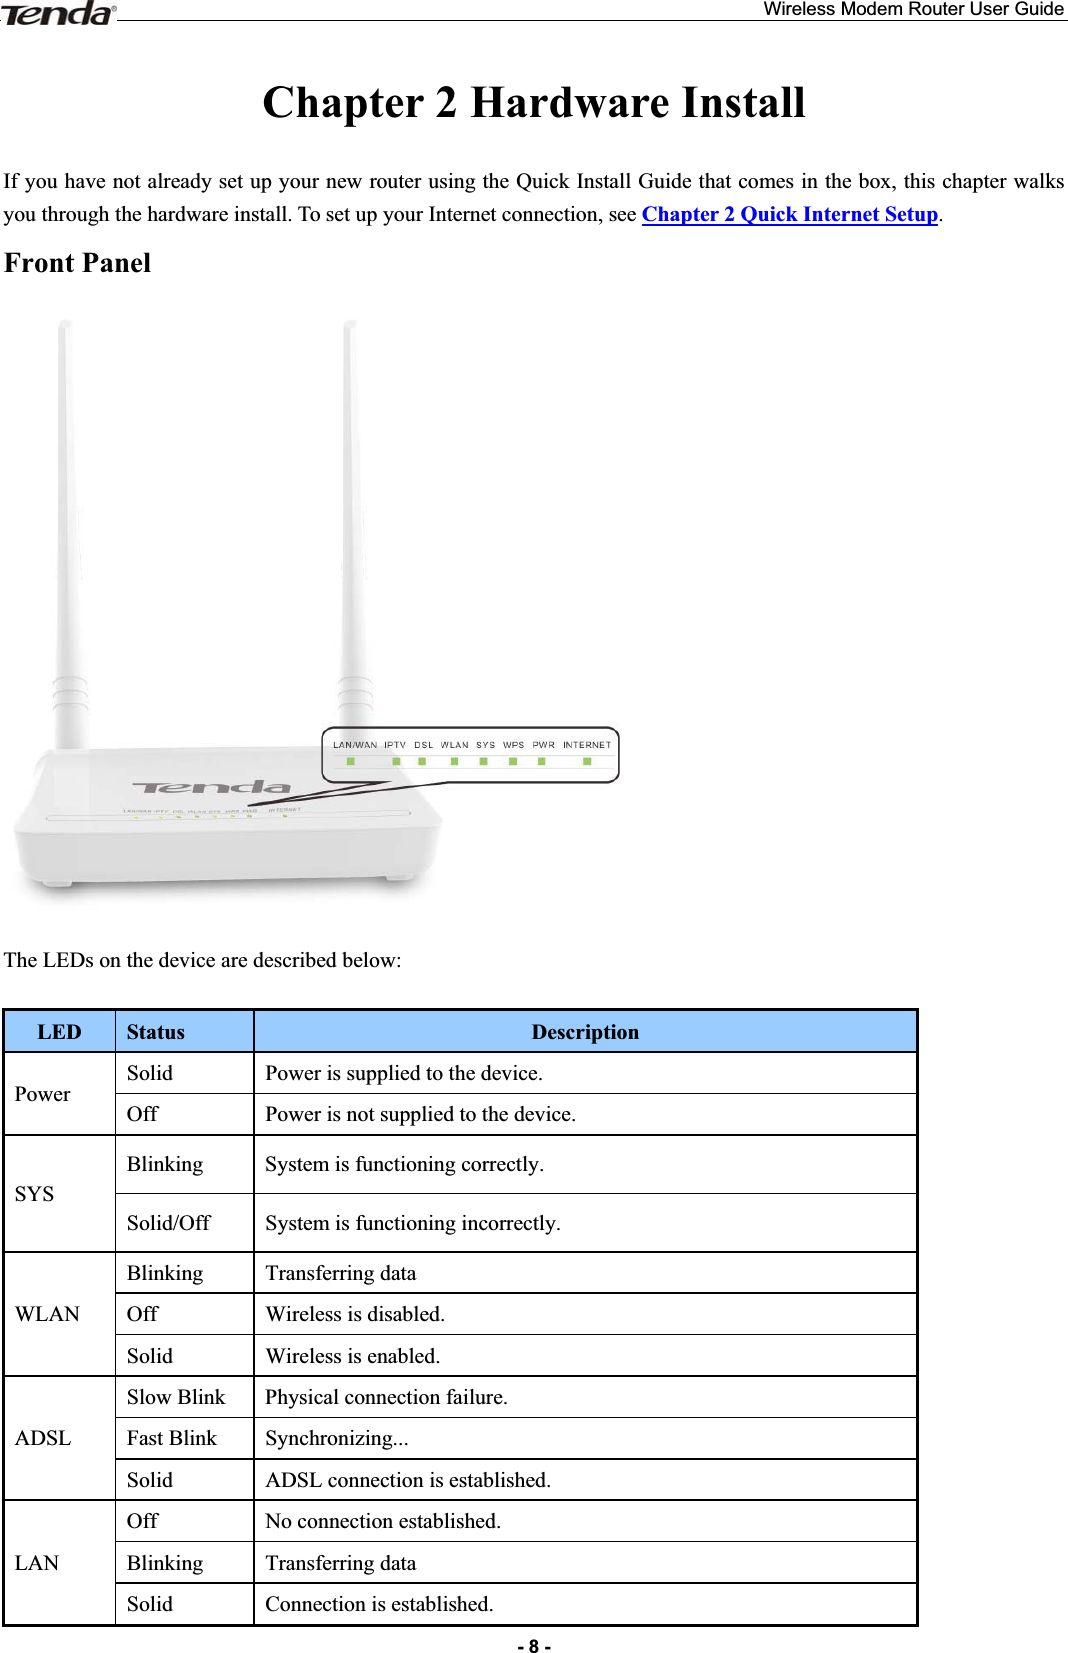 Wireless Modem Router User Guide-8 -Chapter 2 Hardware Install If you have not already set up your new router using the Quick Install Guide that comes in the box, this chapter walks you through the hardware install. To set up your Internet connection, see Chapter 2 Quick Internet Setup.Front Panel The LEDs on the device are described below: LED Status  DescriptionPowerSolid  Power is supplied to the device. Off  Power is not supplied to the device. SYS Blinking  System is functioning correctly. Solid/Off  System is functioning incorrectly. WLANBlinking Transferring data Off  Wireless is disabled. Solid  Wireless is enabled. ADSL Slow Blink  Physical connection failure.   Fast Blink  Synchronizing... Solid  ADSL connection is established. LANOff  No connection established. Blinking Transferring data Solid  Connection is established. 